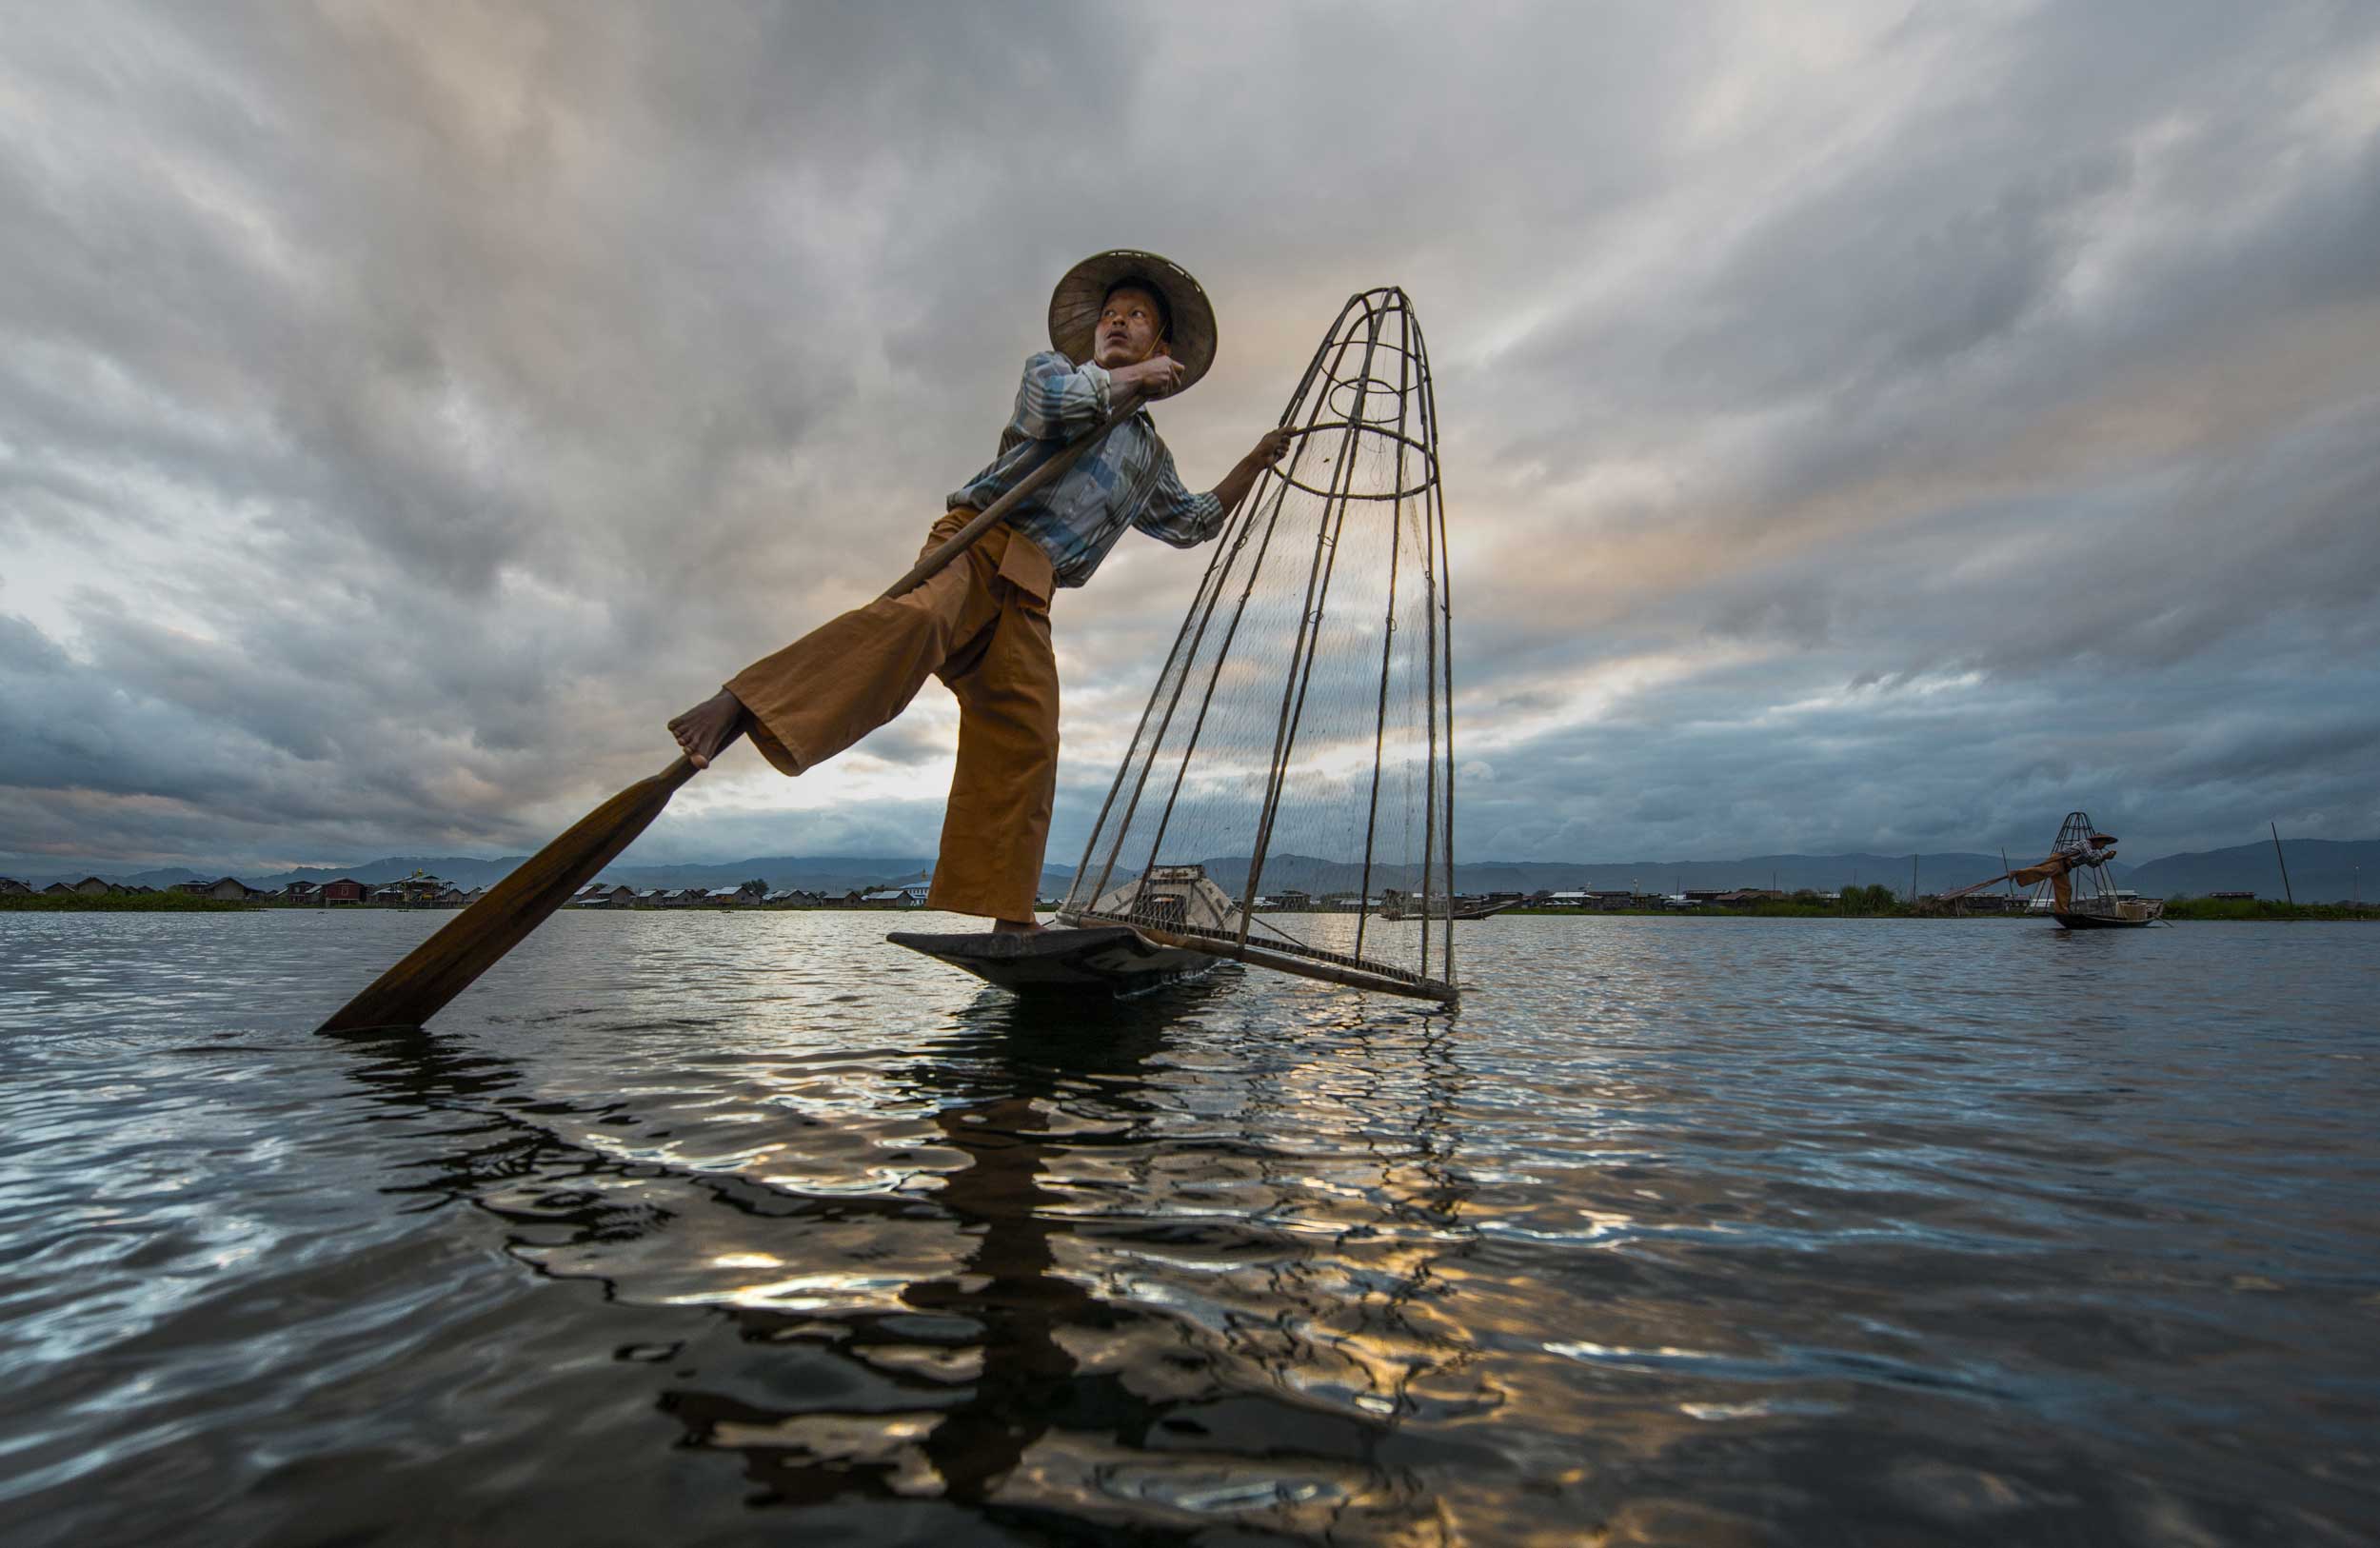 Fisherman balanced on one foot while paddling with the other in Myanmar